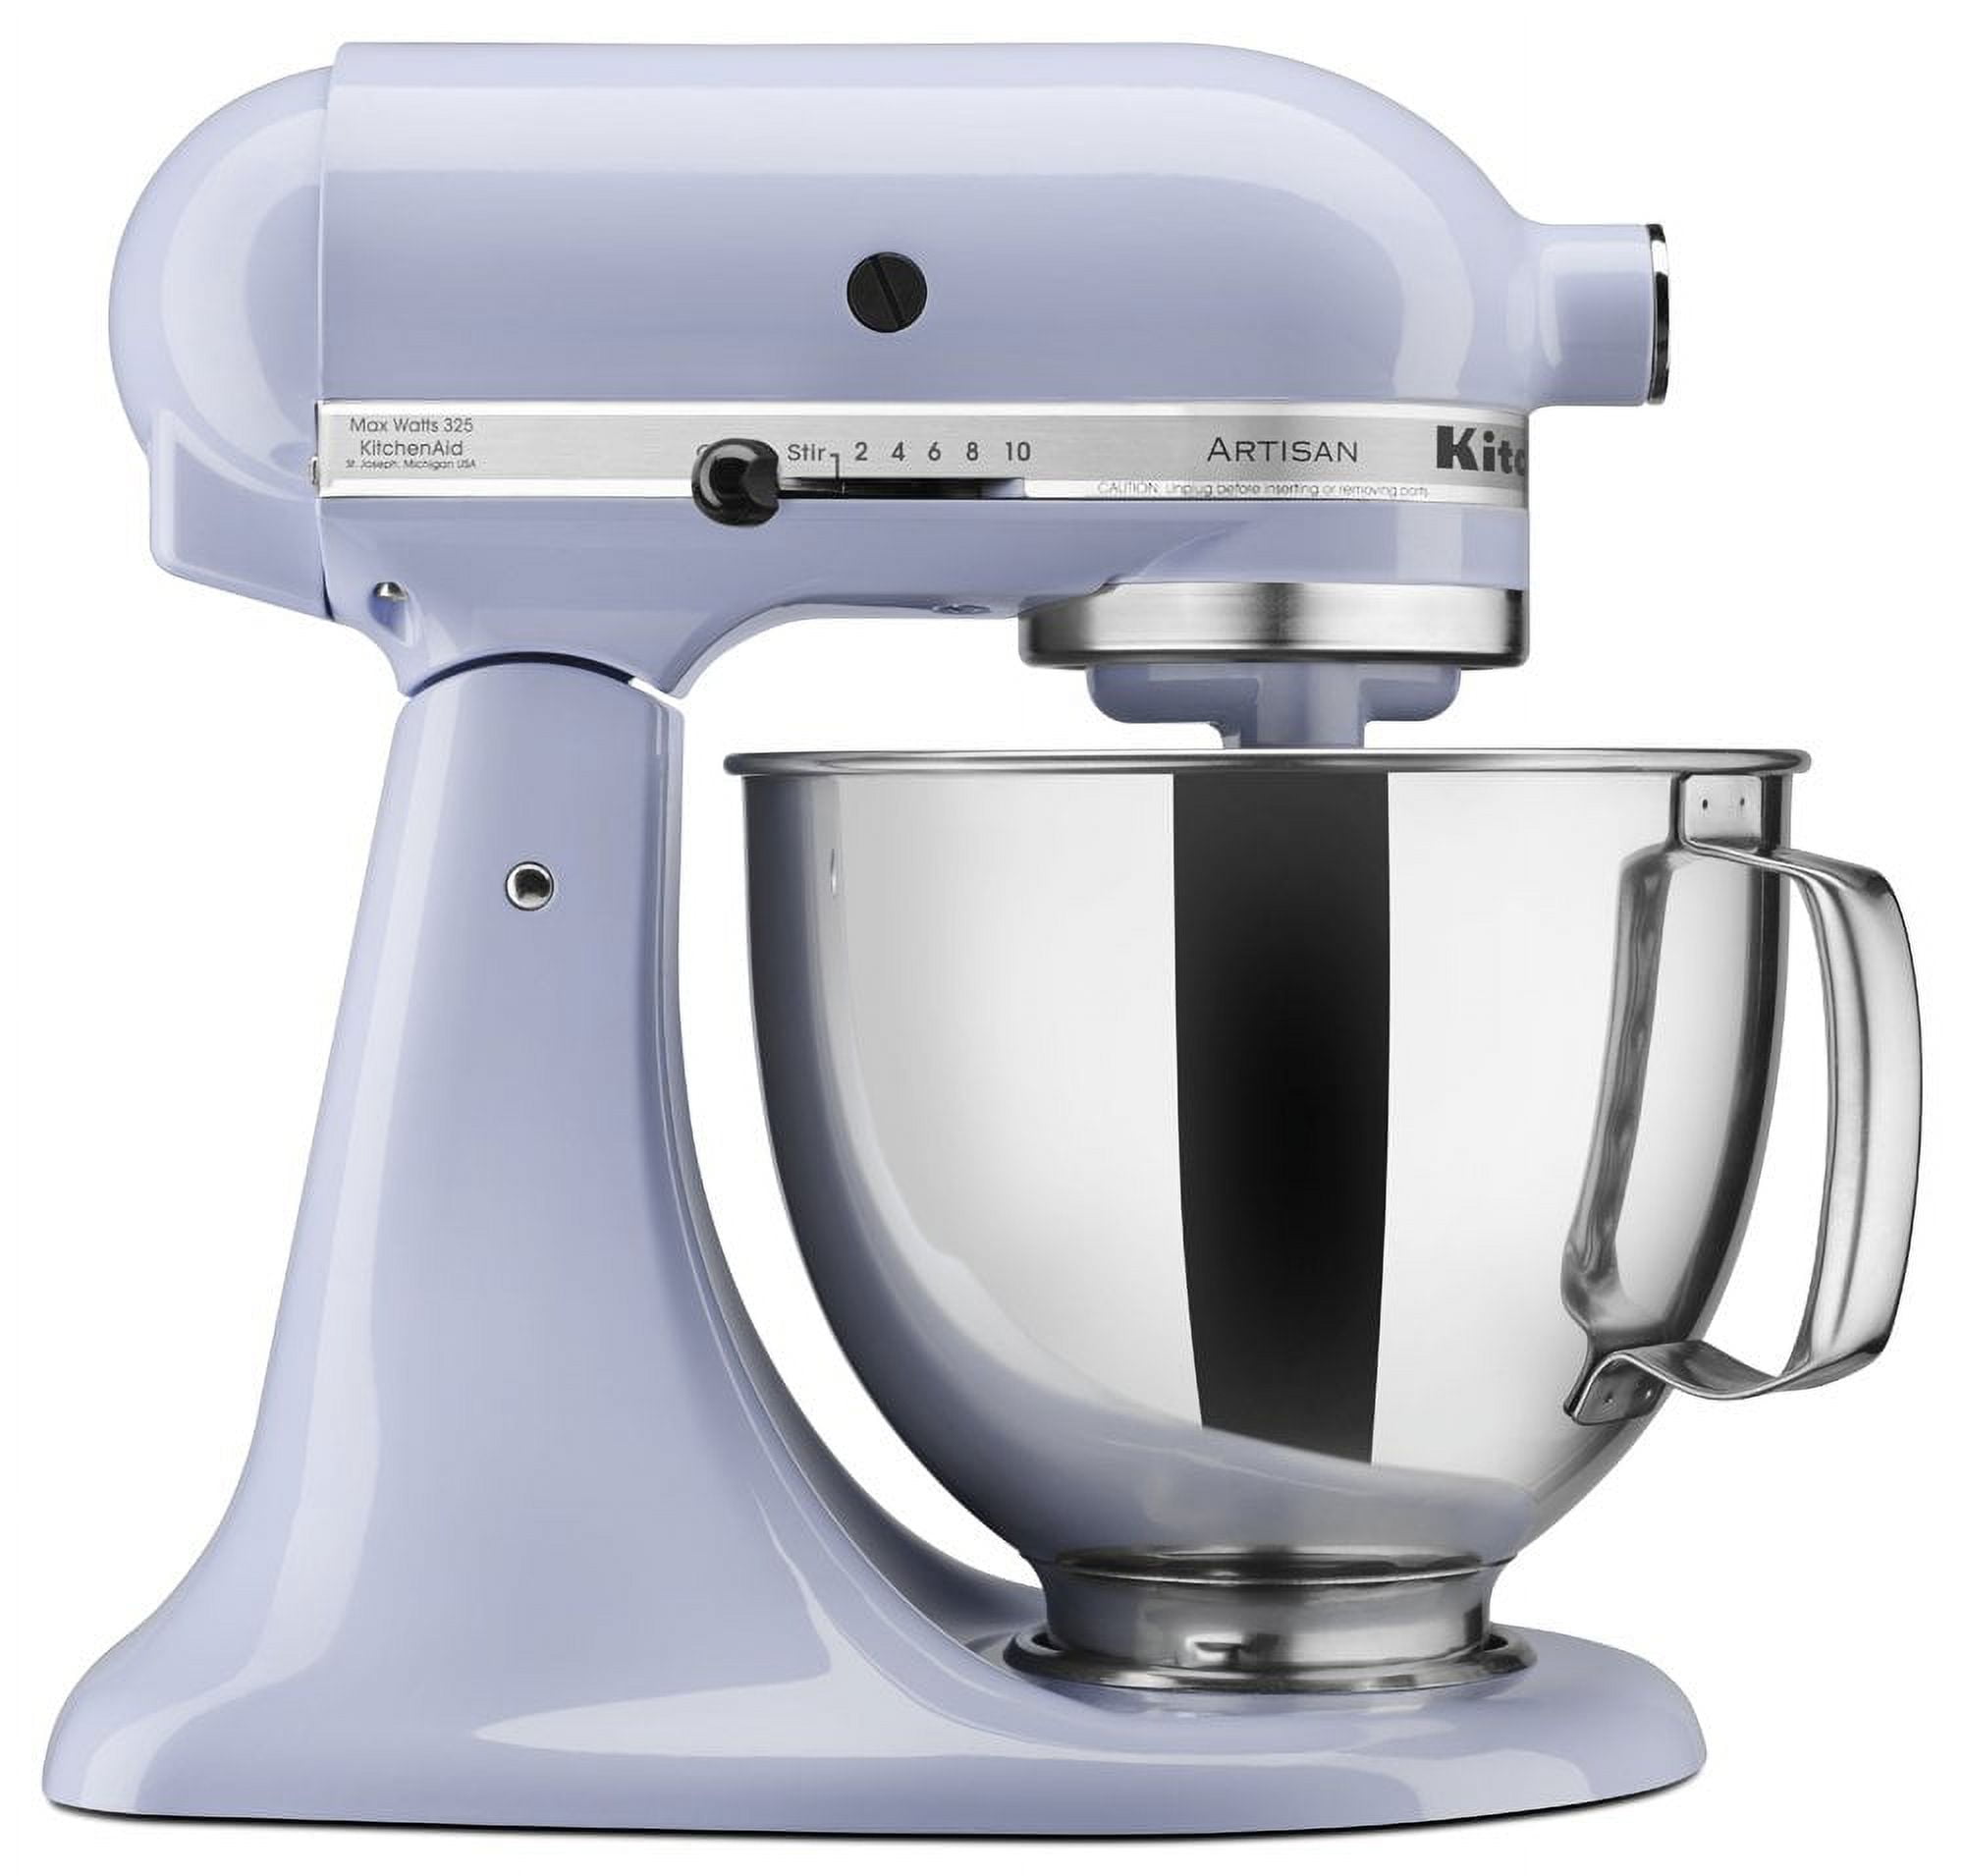 Walmart Released an Exclusive Line of KitchenAid Products